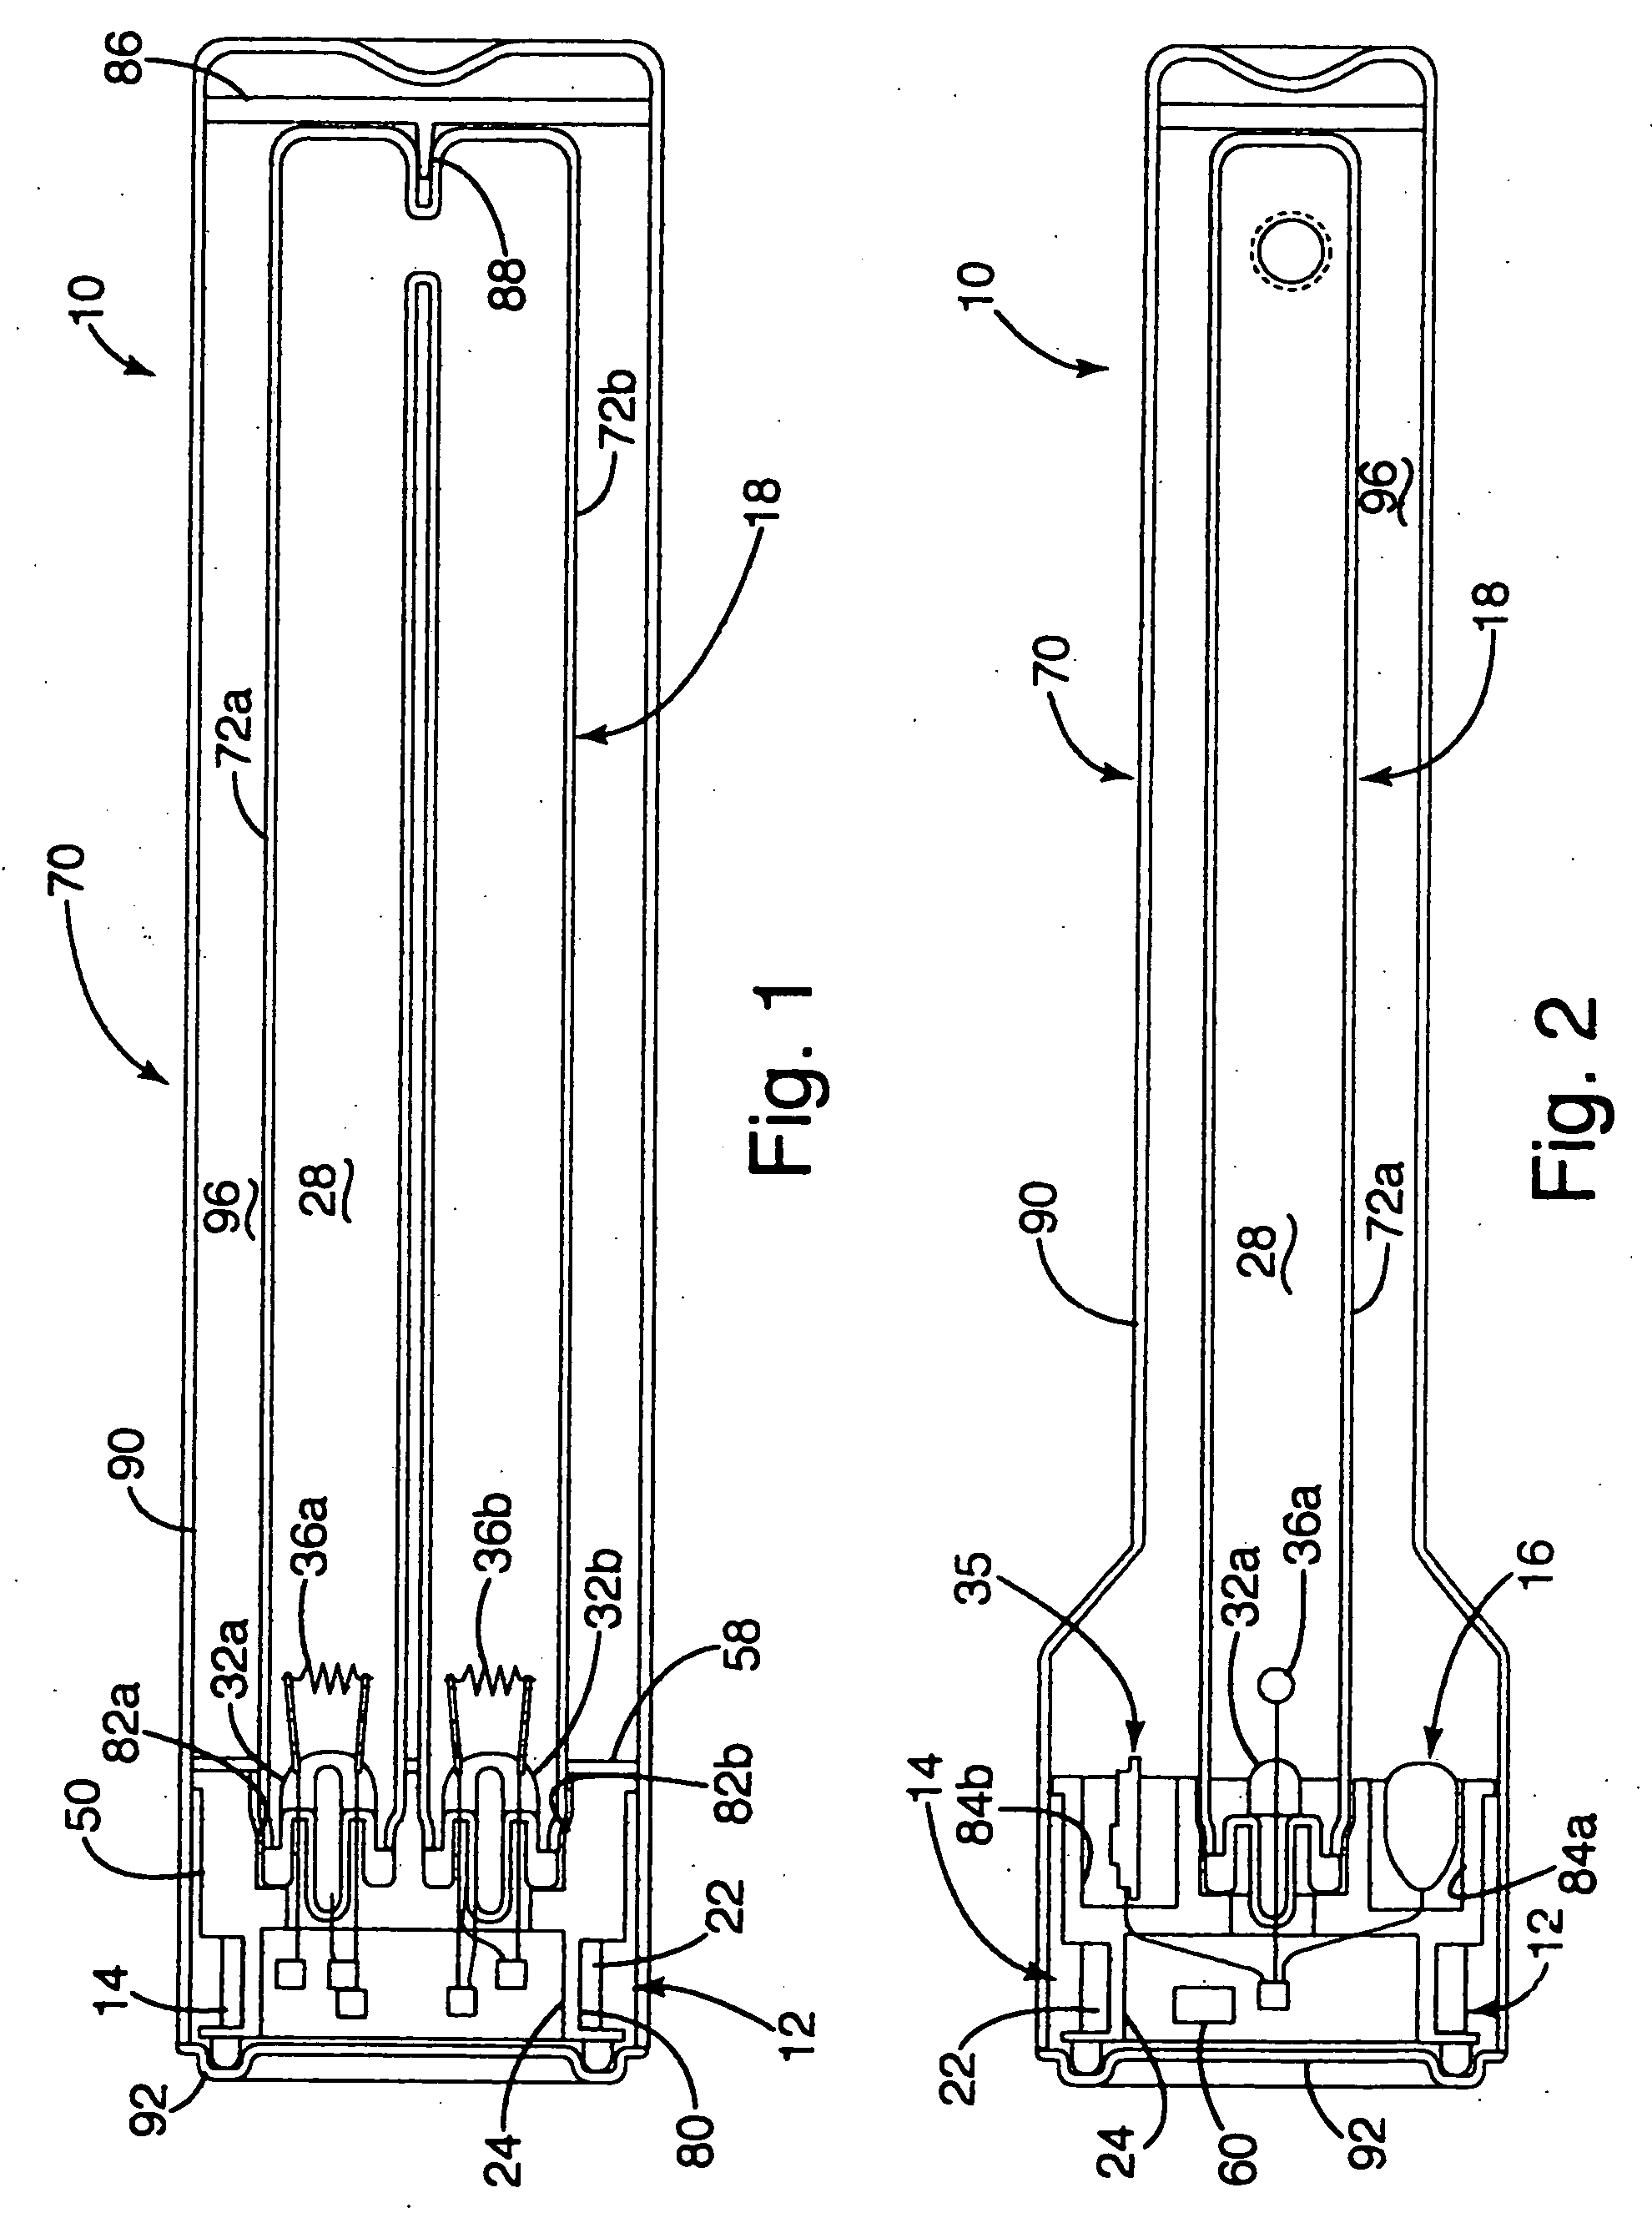 Method of manufacturing a lamp assembly